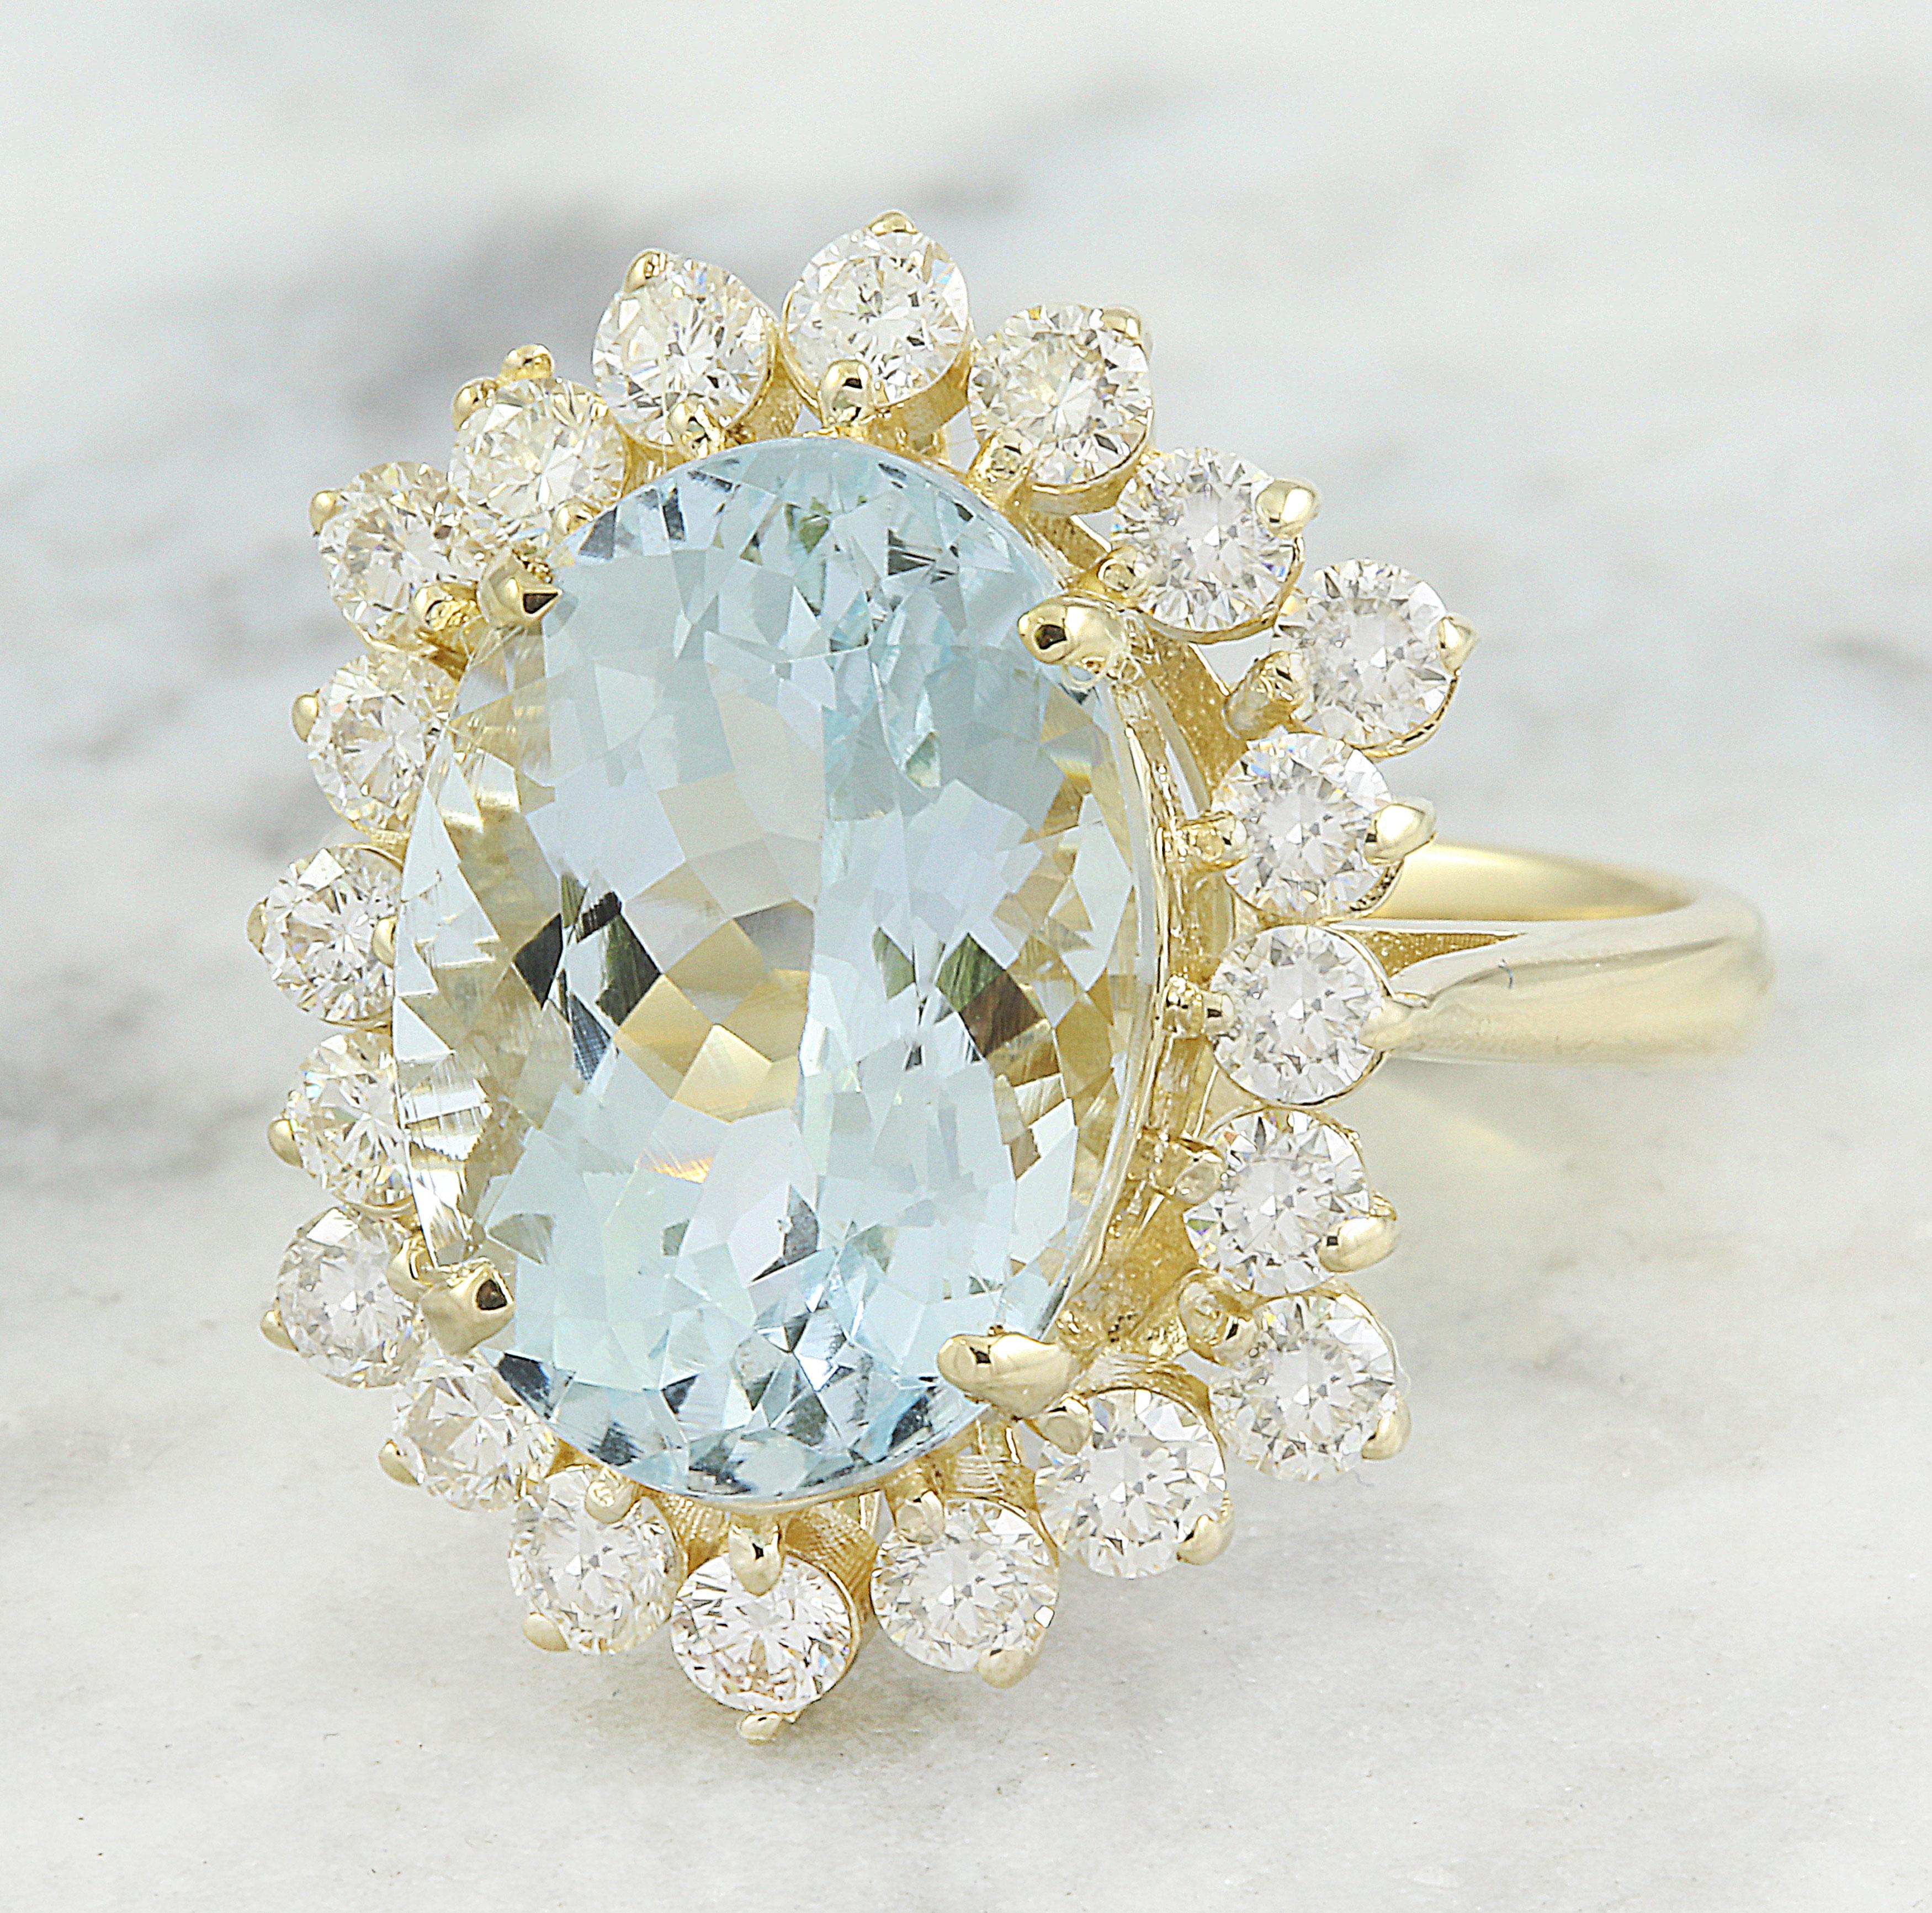 Elevate your elegance with our 10.40 carat aquamarine diamond ring in 14K yellow gold. Featuring a captivating 5.90 carat aquamarine and 1.10 carats of diamonds, this ring is a statement of sophistication. With a total weight of 6 grams and a face